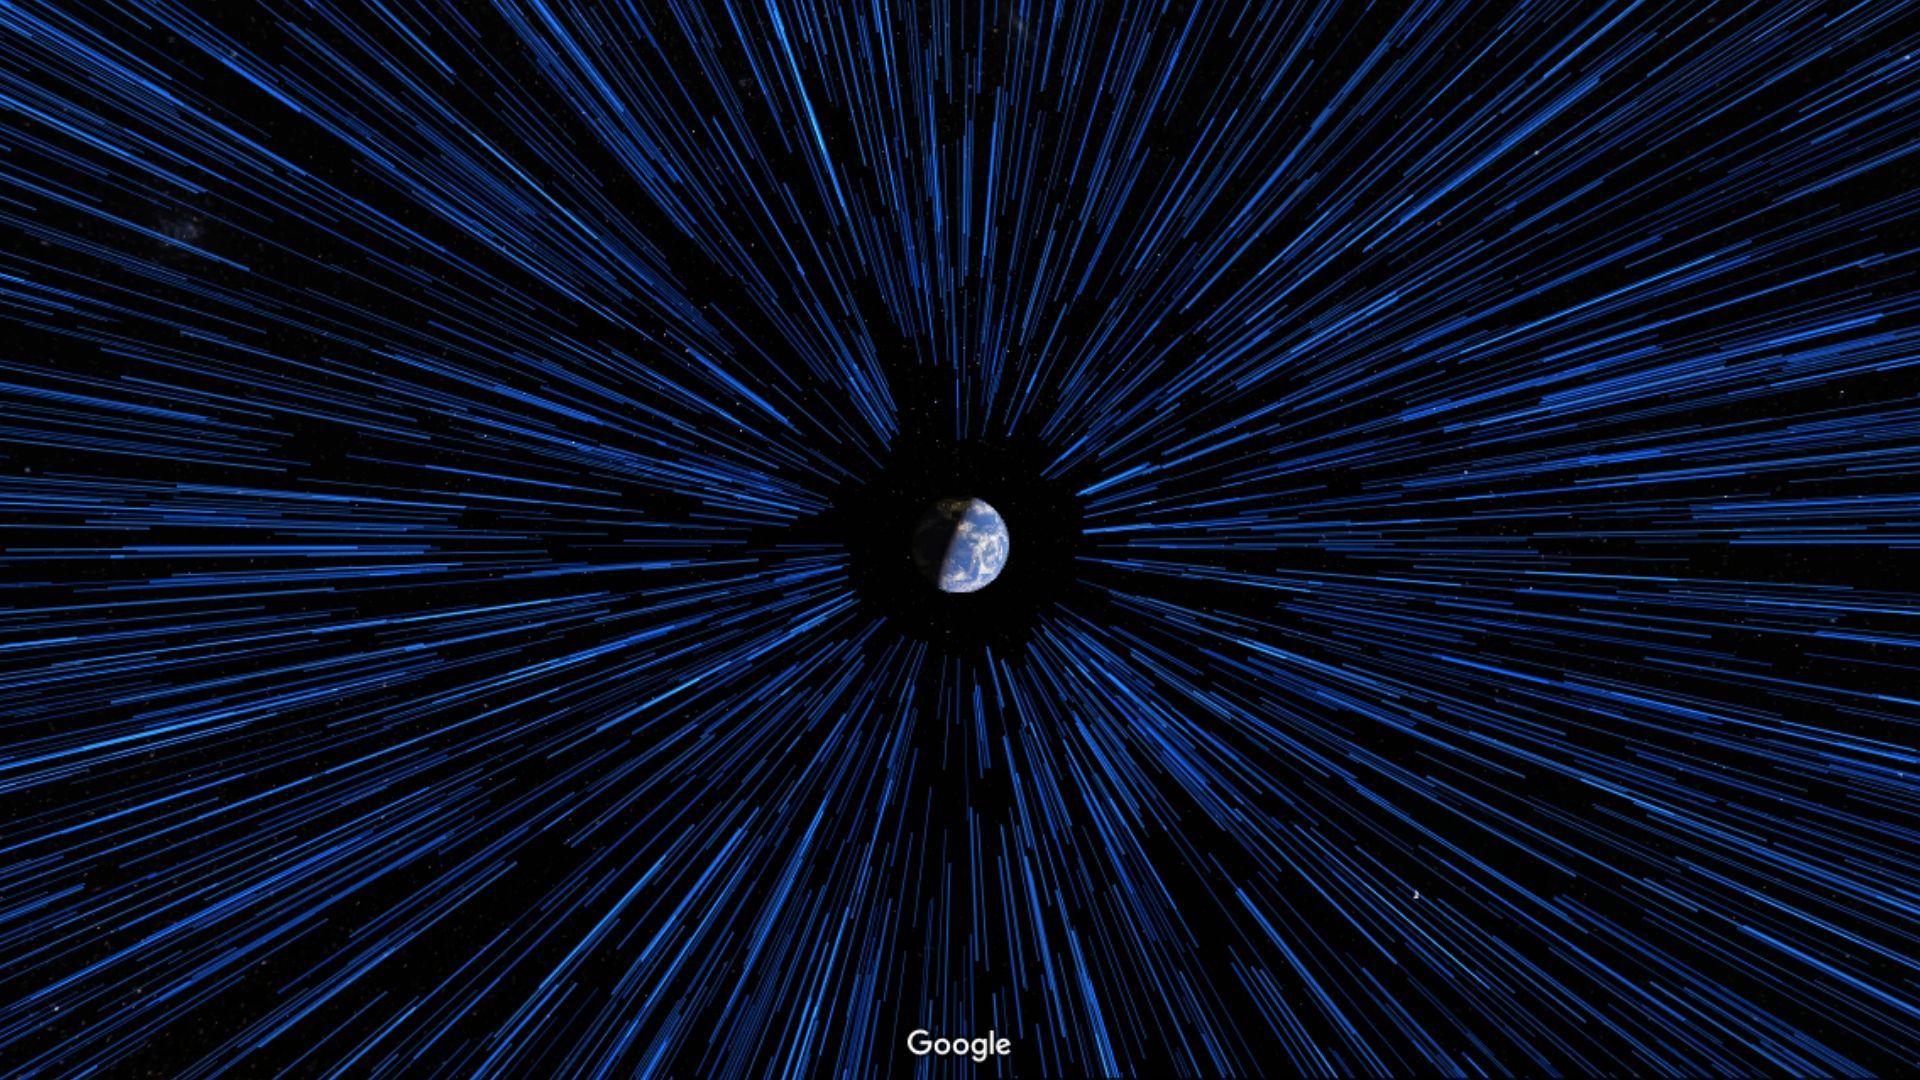 Google Maps Introduces Hyperspace Animation While Switching Between Planets